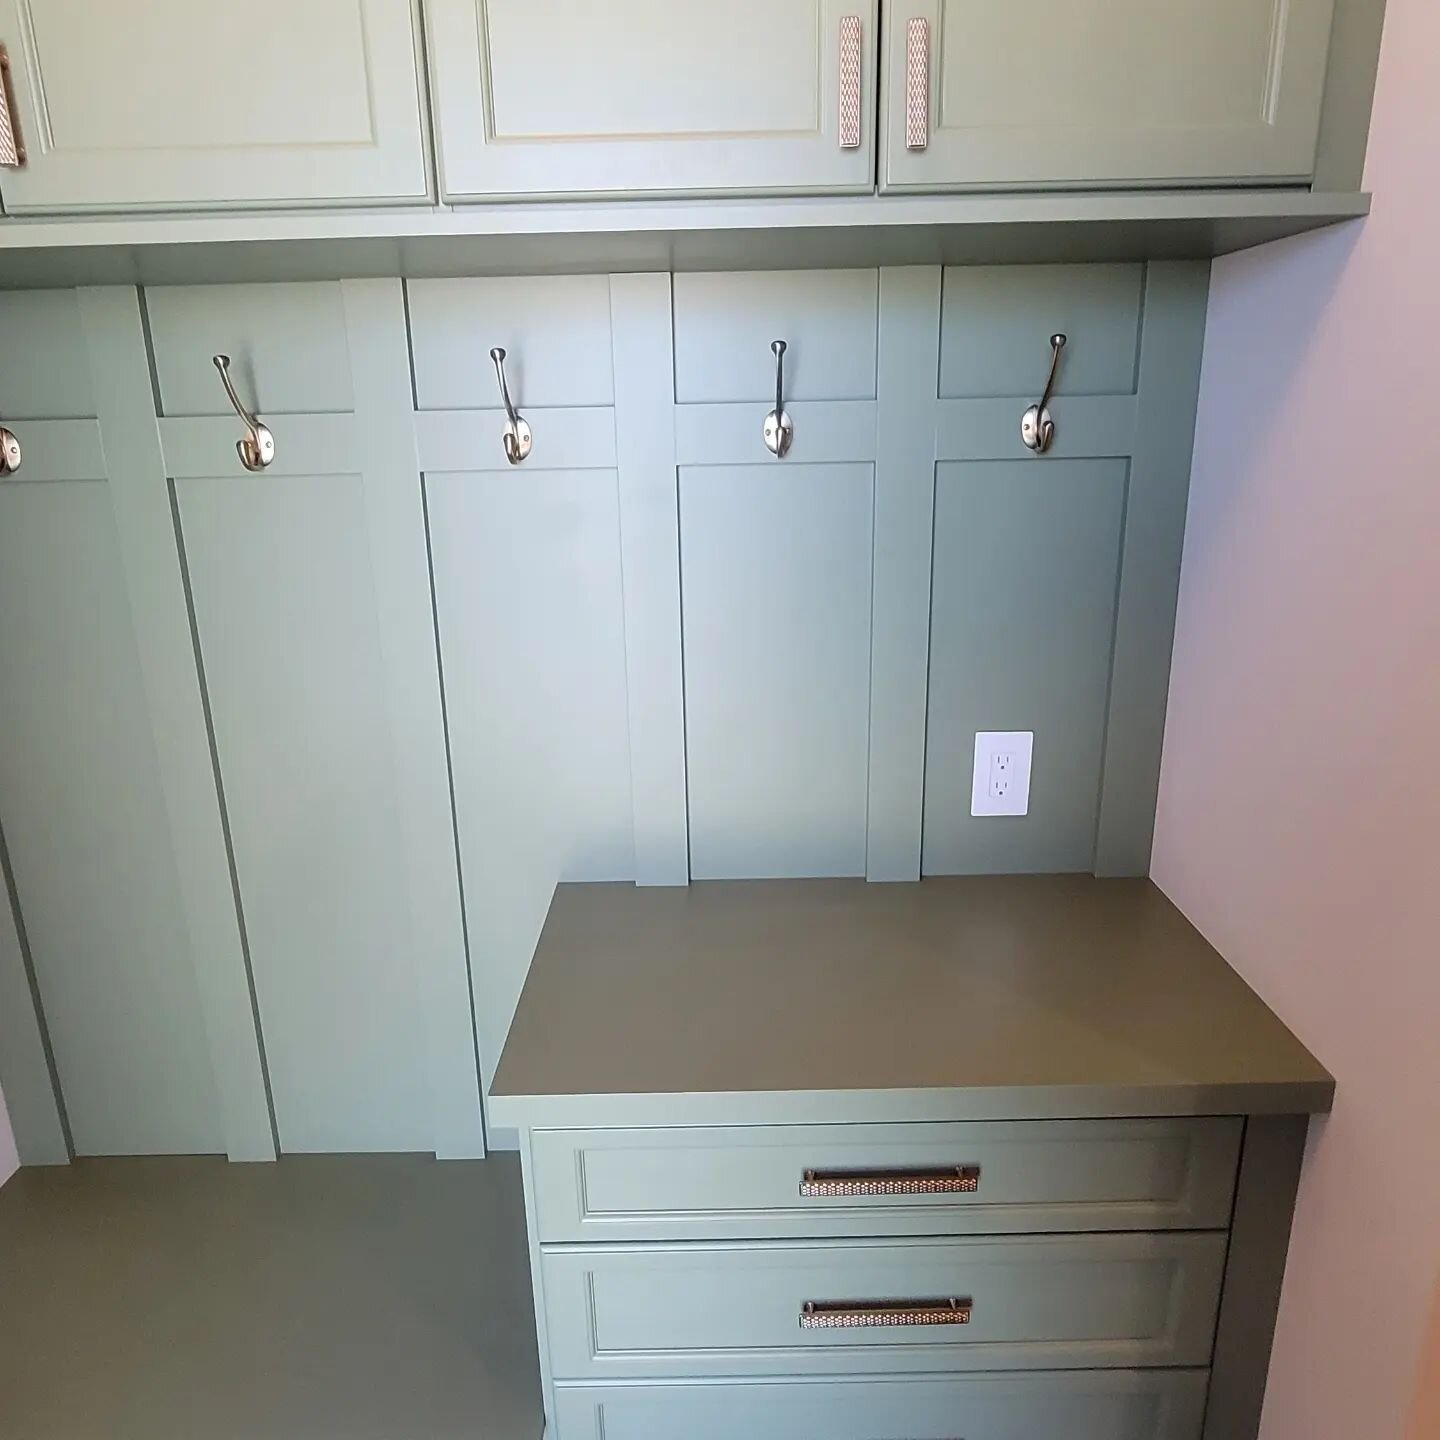 One of this week's completed projects, was just a quickie. This is actually a follow-up repair for a local cabinet maker whose customer needed a few spots fixed up where nail holes and patchwork was done. The color was slightly off and their customer